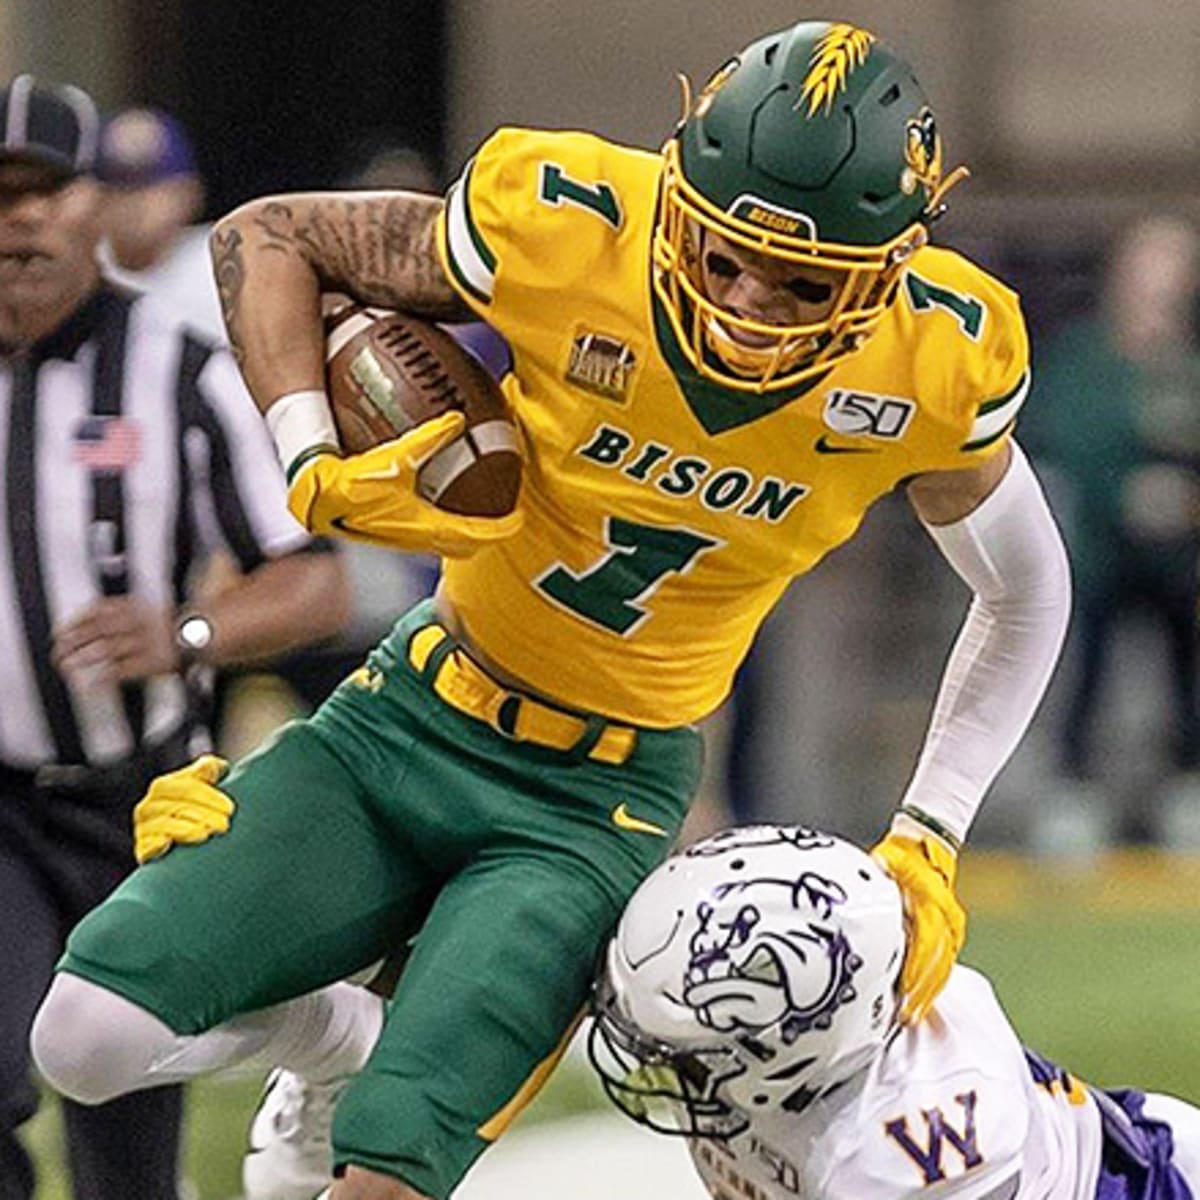 Ndsu 2022 Schedule Fcs Football: 25 2022 Nfl Draft Prospects To Watch - Athlonsports.com |  Expert Predictions, Picks, And Previews